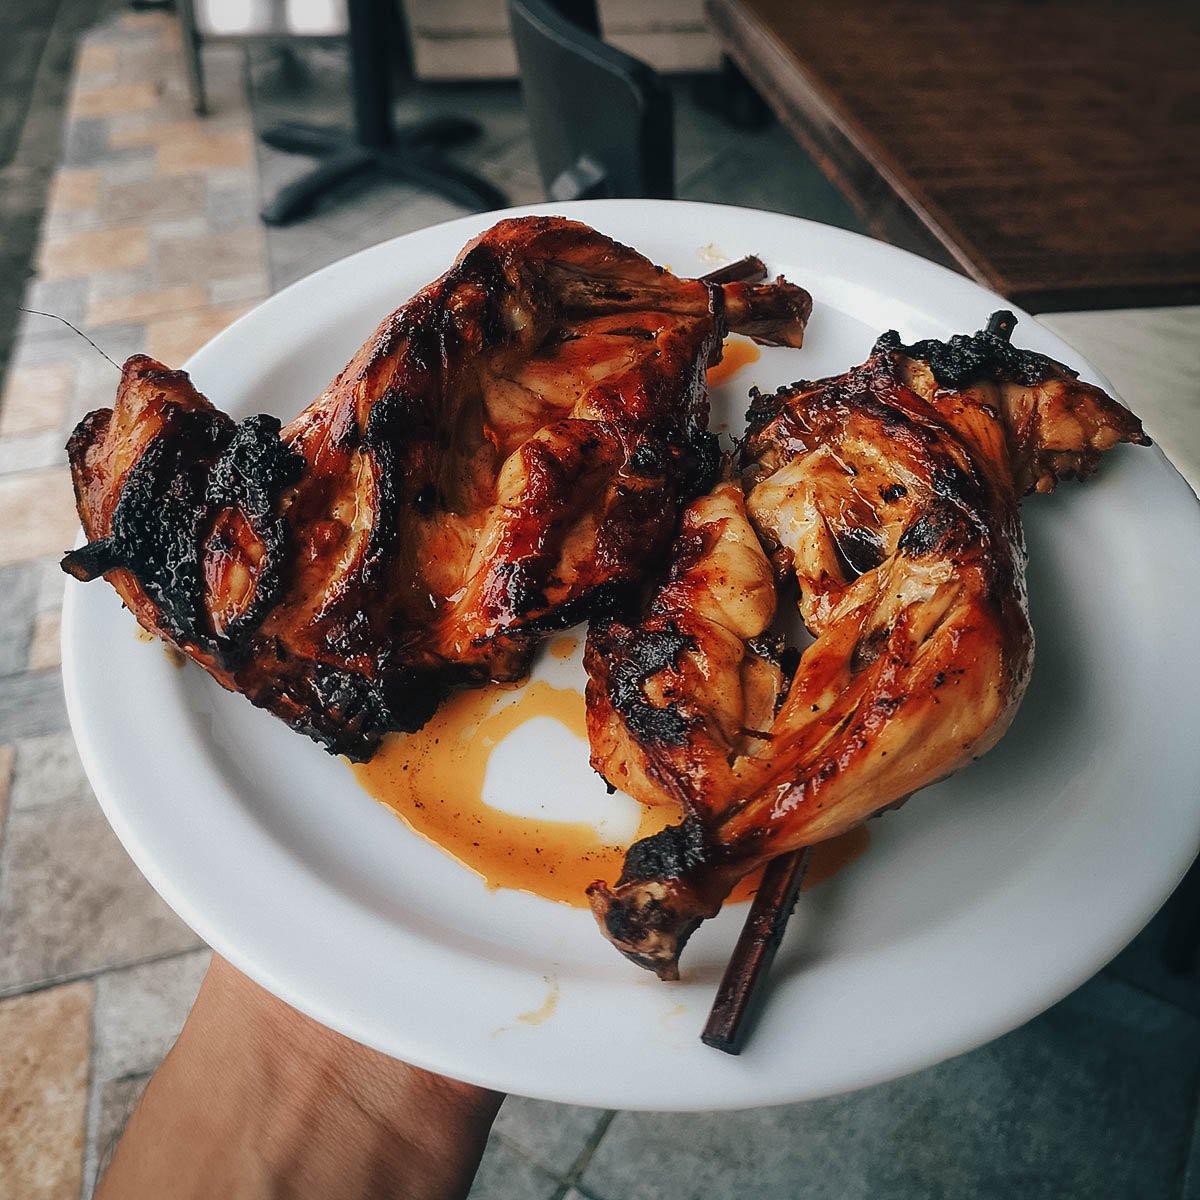 Chicken inasal with soy sauce and vinegar, a popular dish in the Philippines